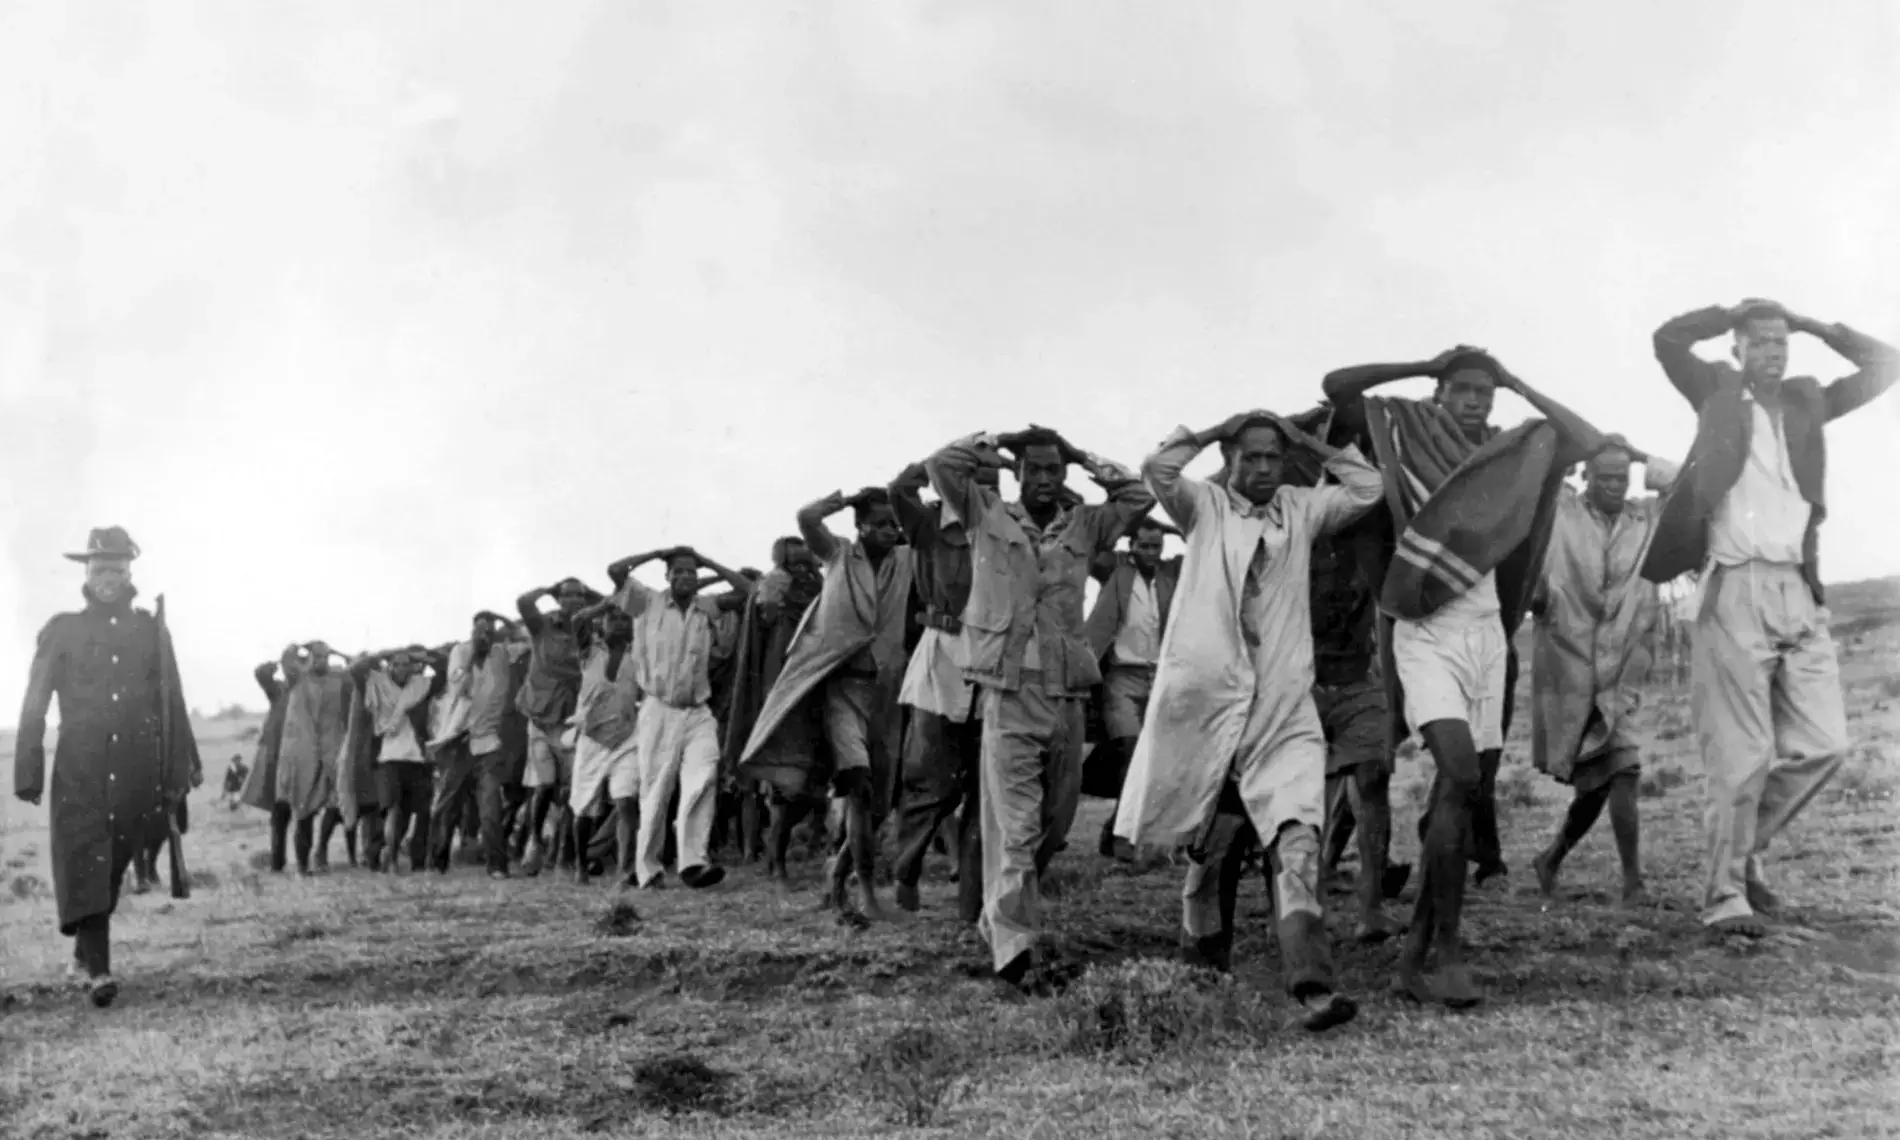 The MAU MAU (1952-1960) - Uprising, a revolt against colonial rule in Kenya in the 19th Century - African Leaders Magazine 